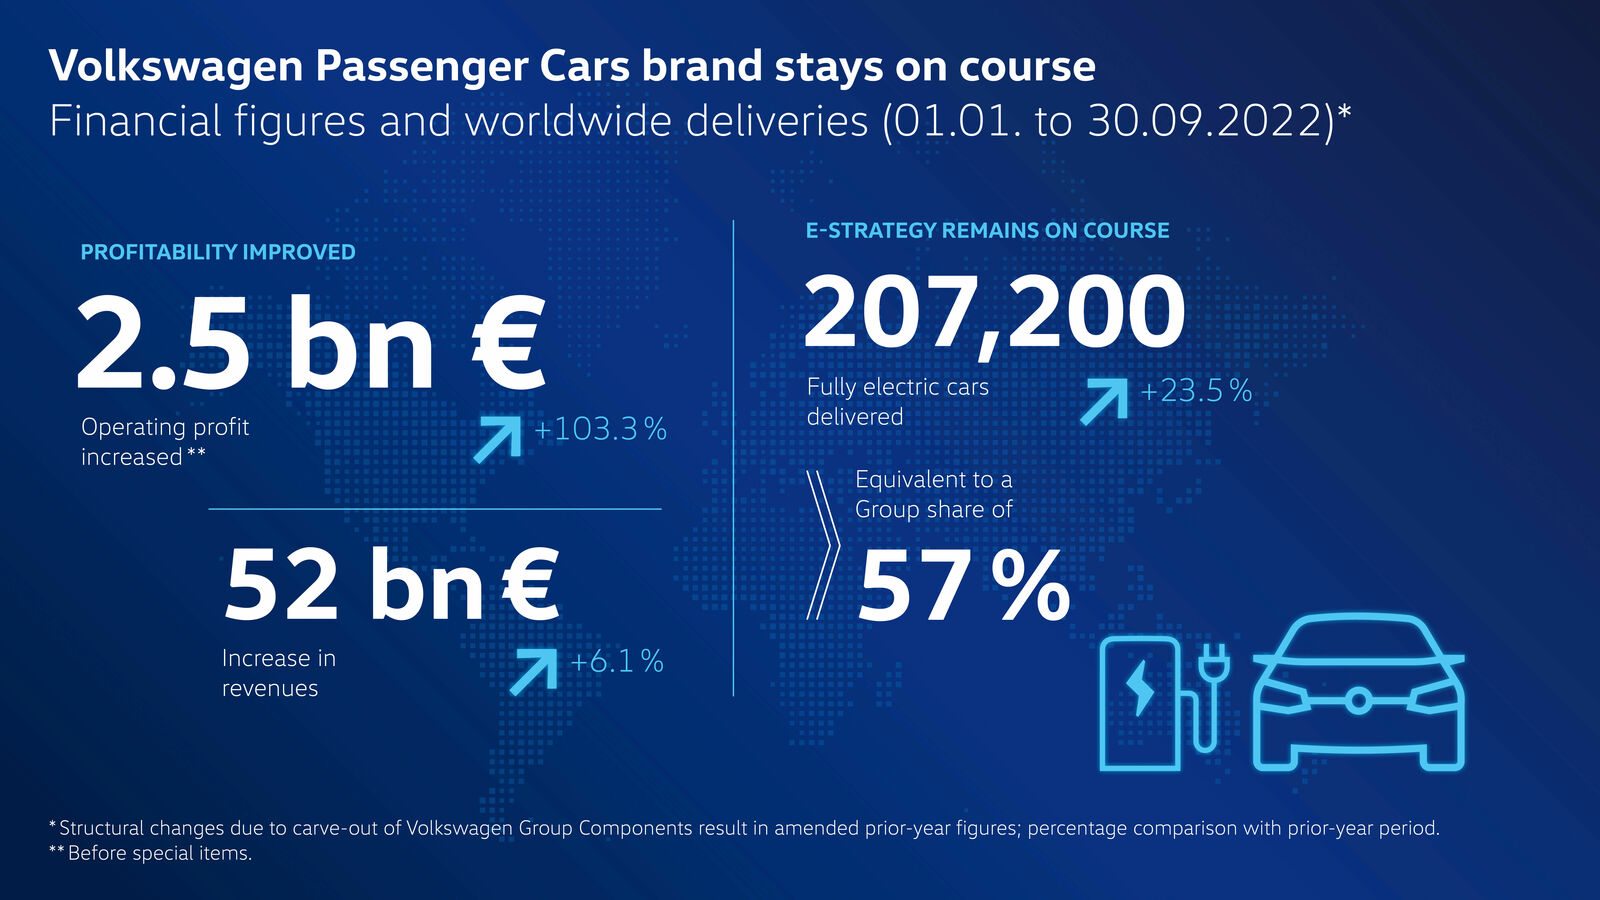 Volkswagen Passenger Cars stays on track in difficult environment